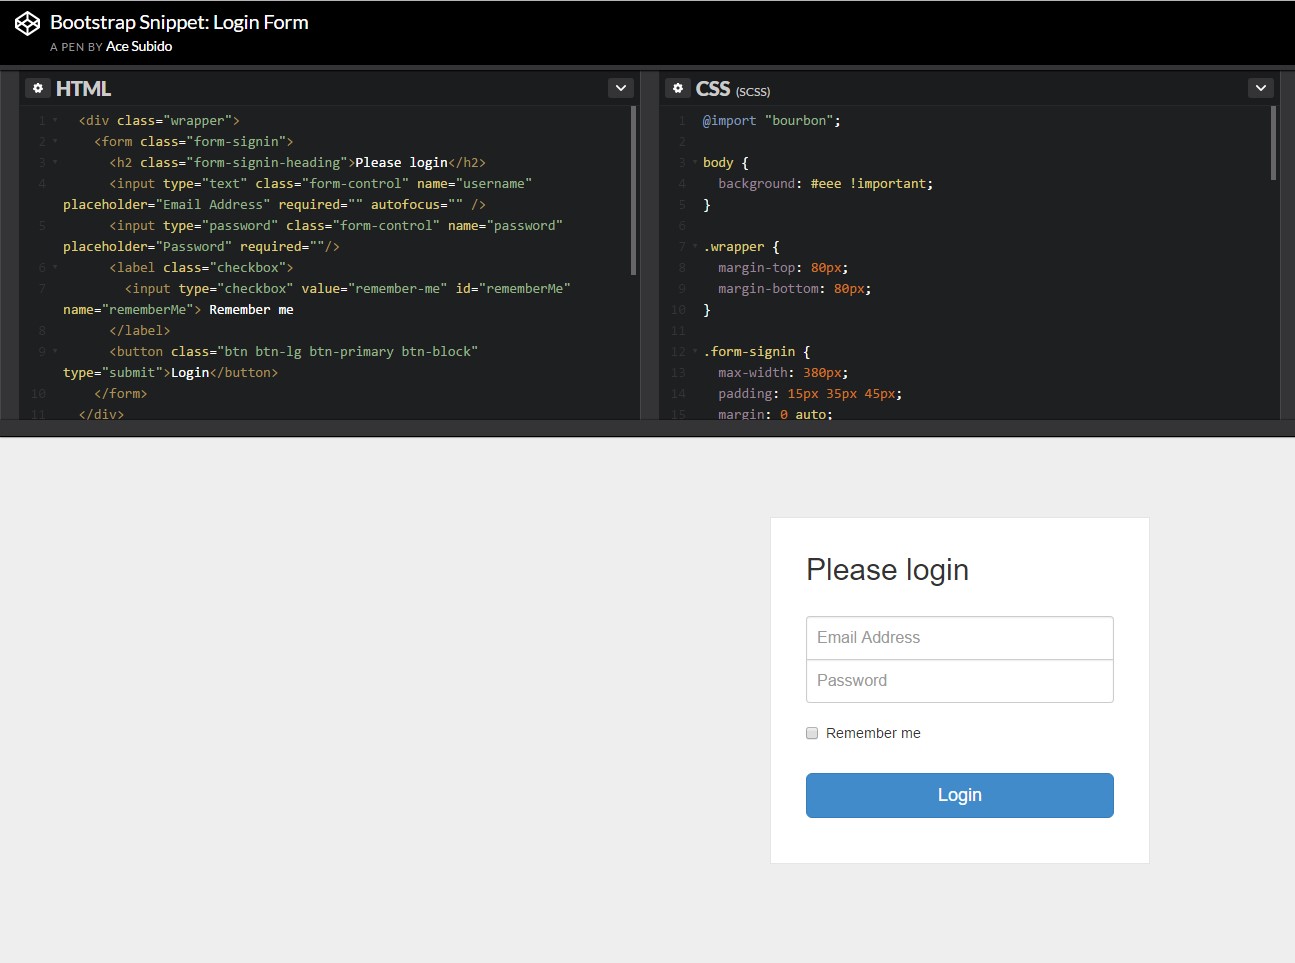  Other  representation of Bootstrap Login Form